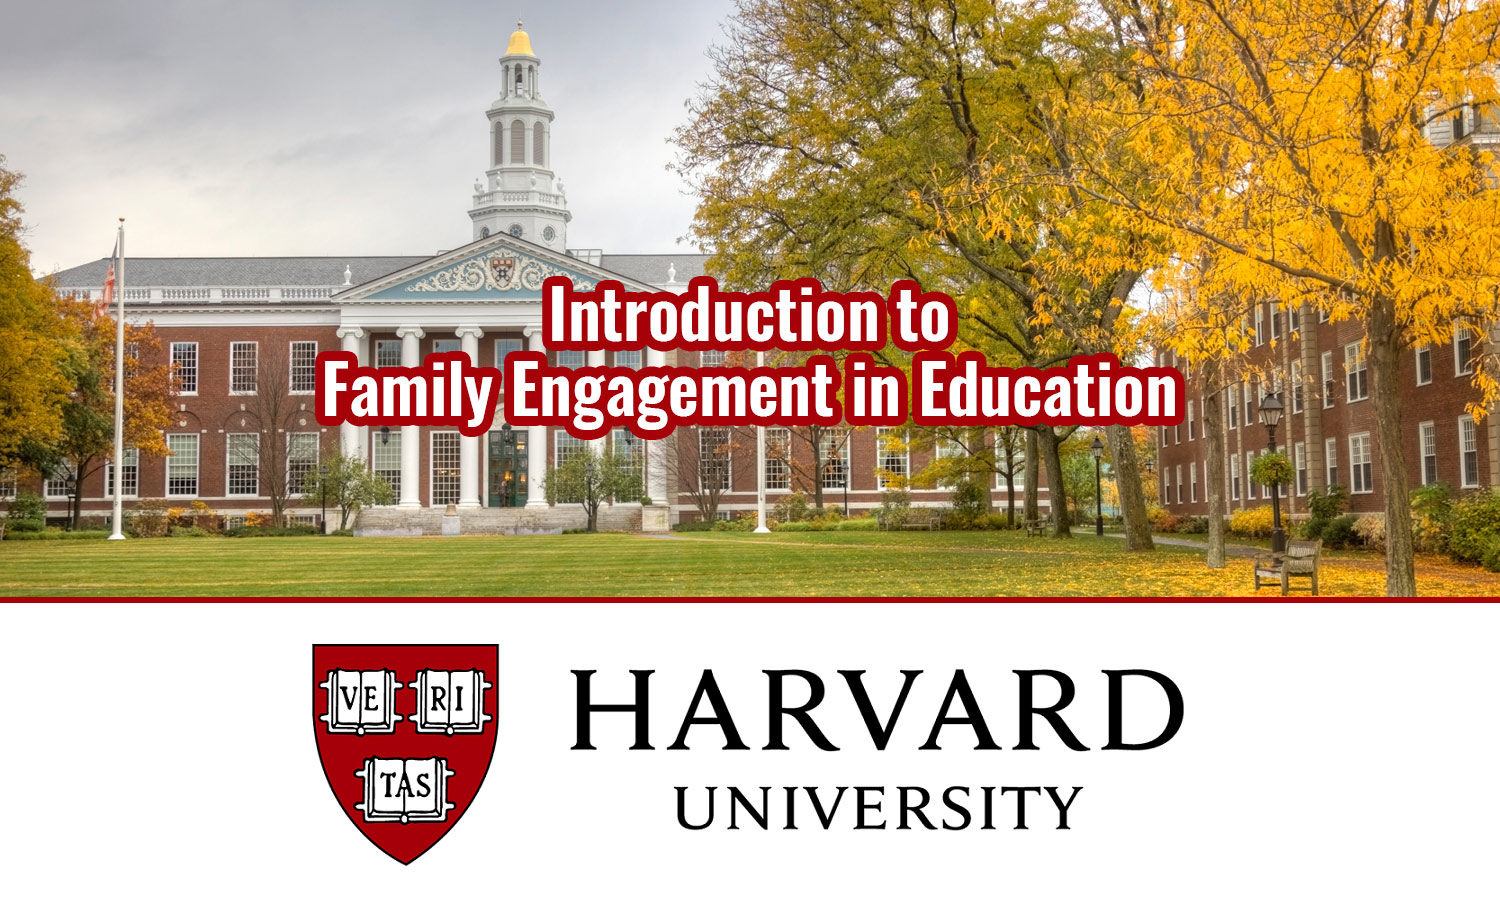 Harvard University Introduction to Family Engagement in Education